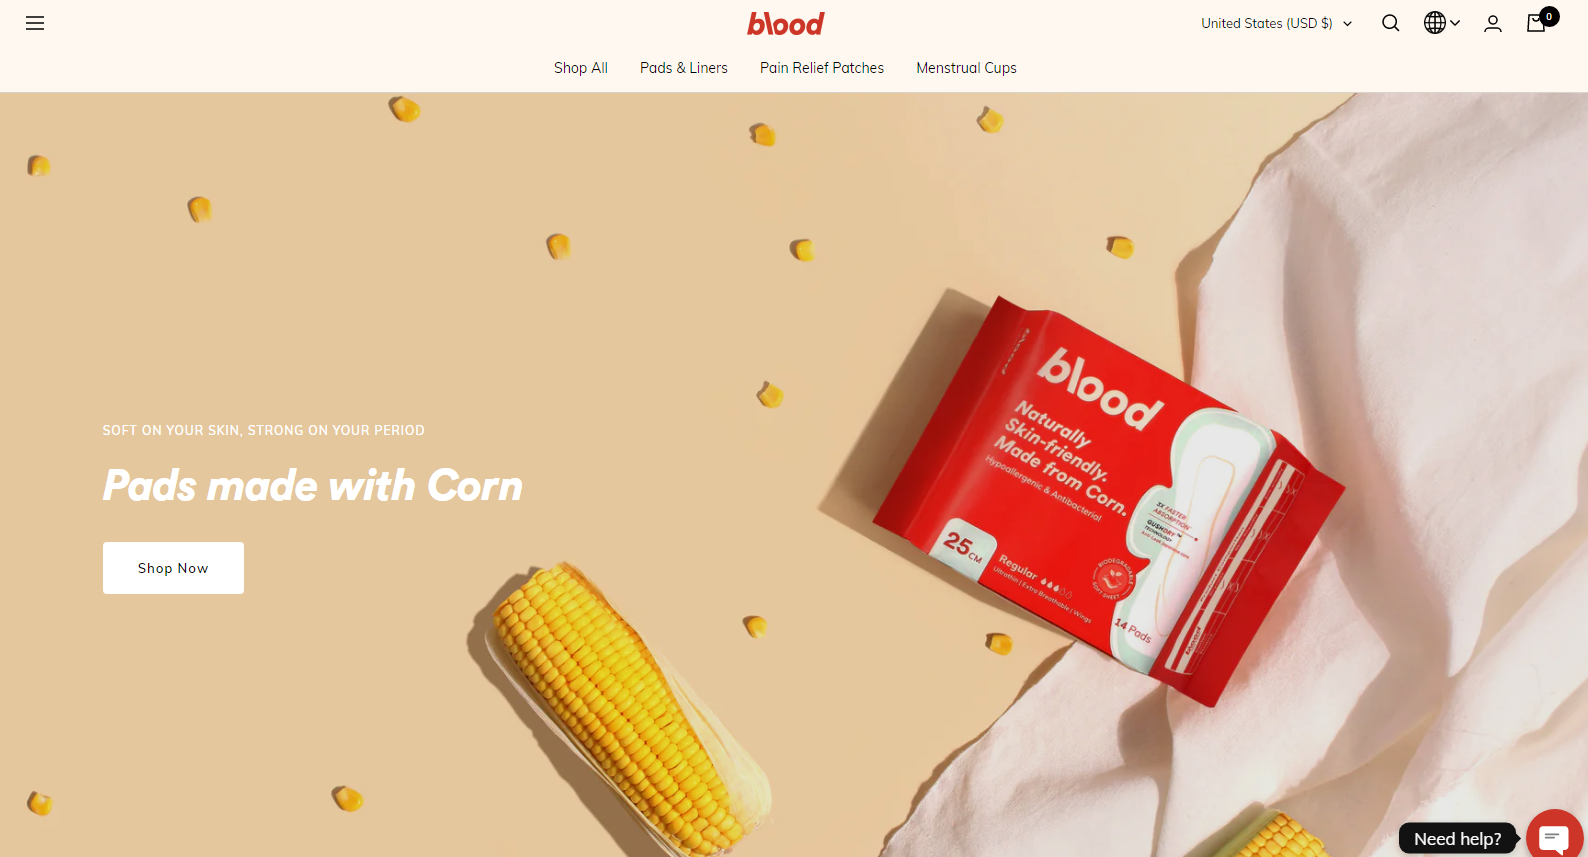 Blood Secures $1.5 Million in Series A Funding Led by DSG Consumer Partners.